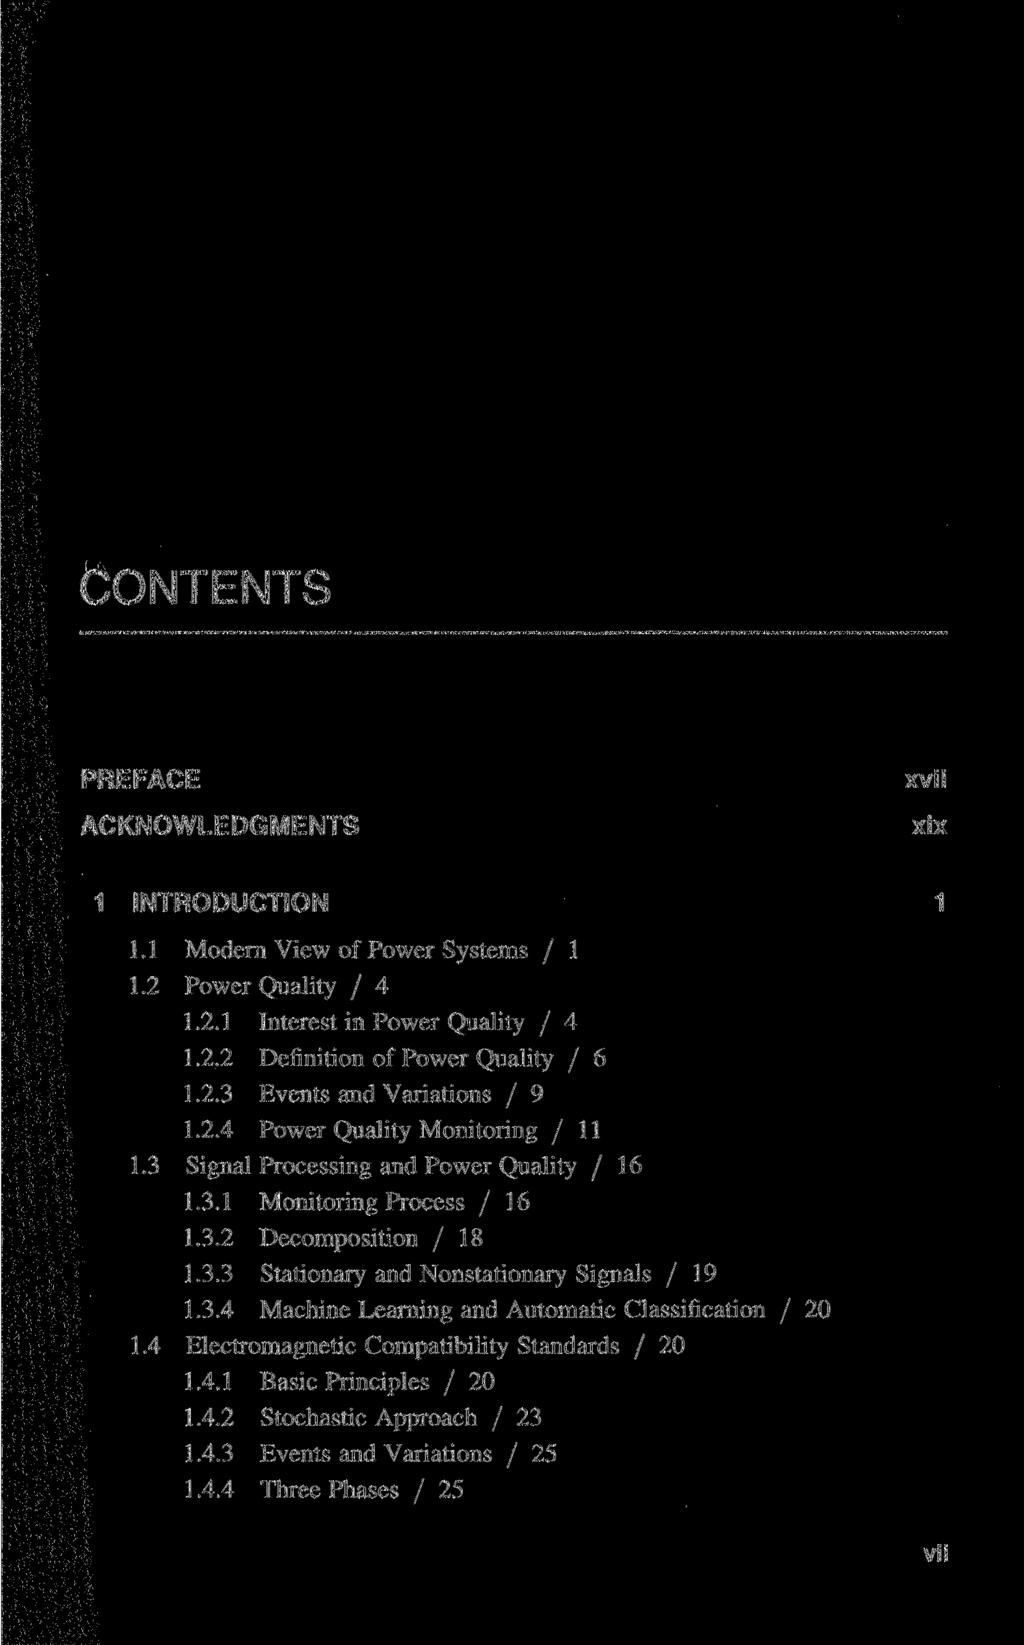 CONTENTS PREFACE ACKNOWLEDGMENTS xvii xix 1 INTRODUCTION 1 1.1 Modern View of Power Systems / 1 1.2 Power Quality / 4 1.2.1 Interest in Power Quality / 4 1.2.2 Definition of Power Quality / 6 1.2.3 Events and Variations / 9 1.